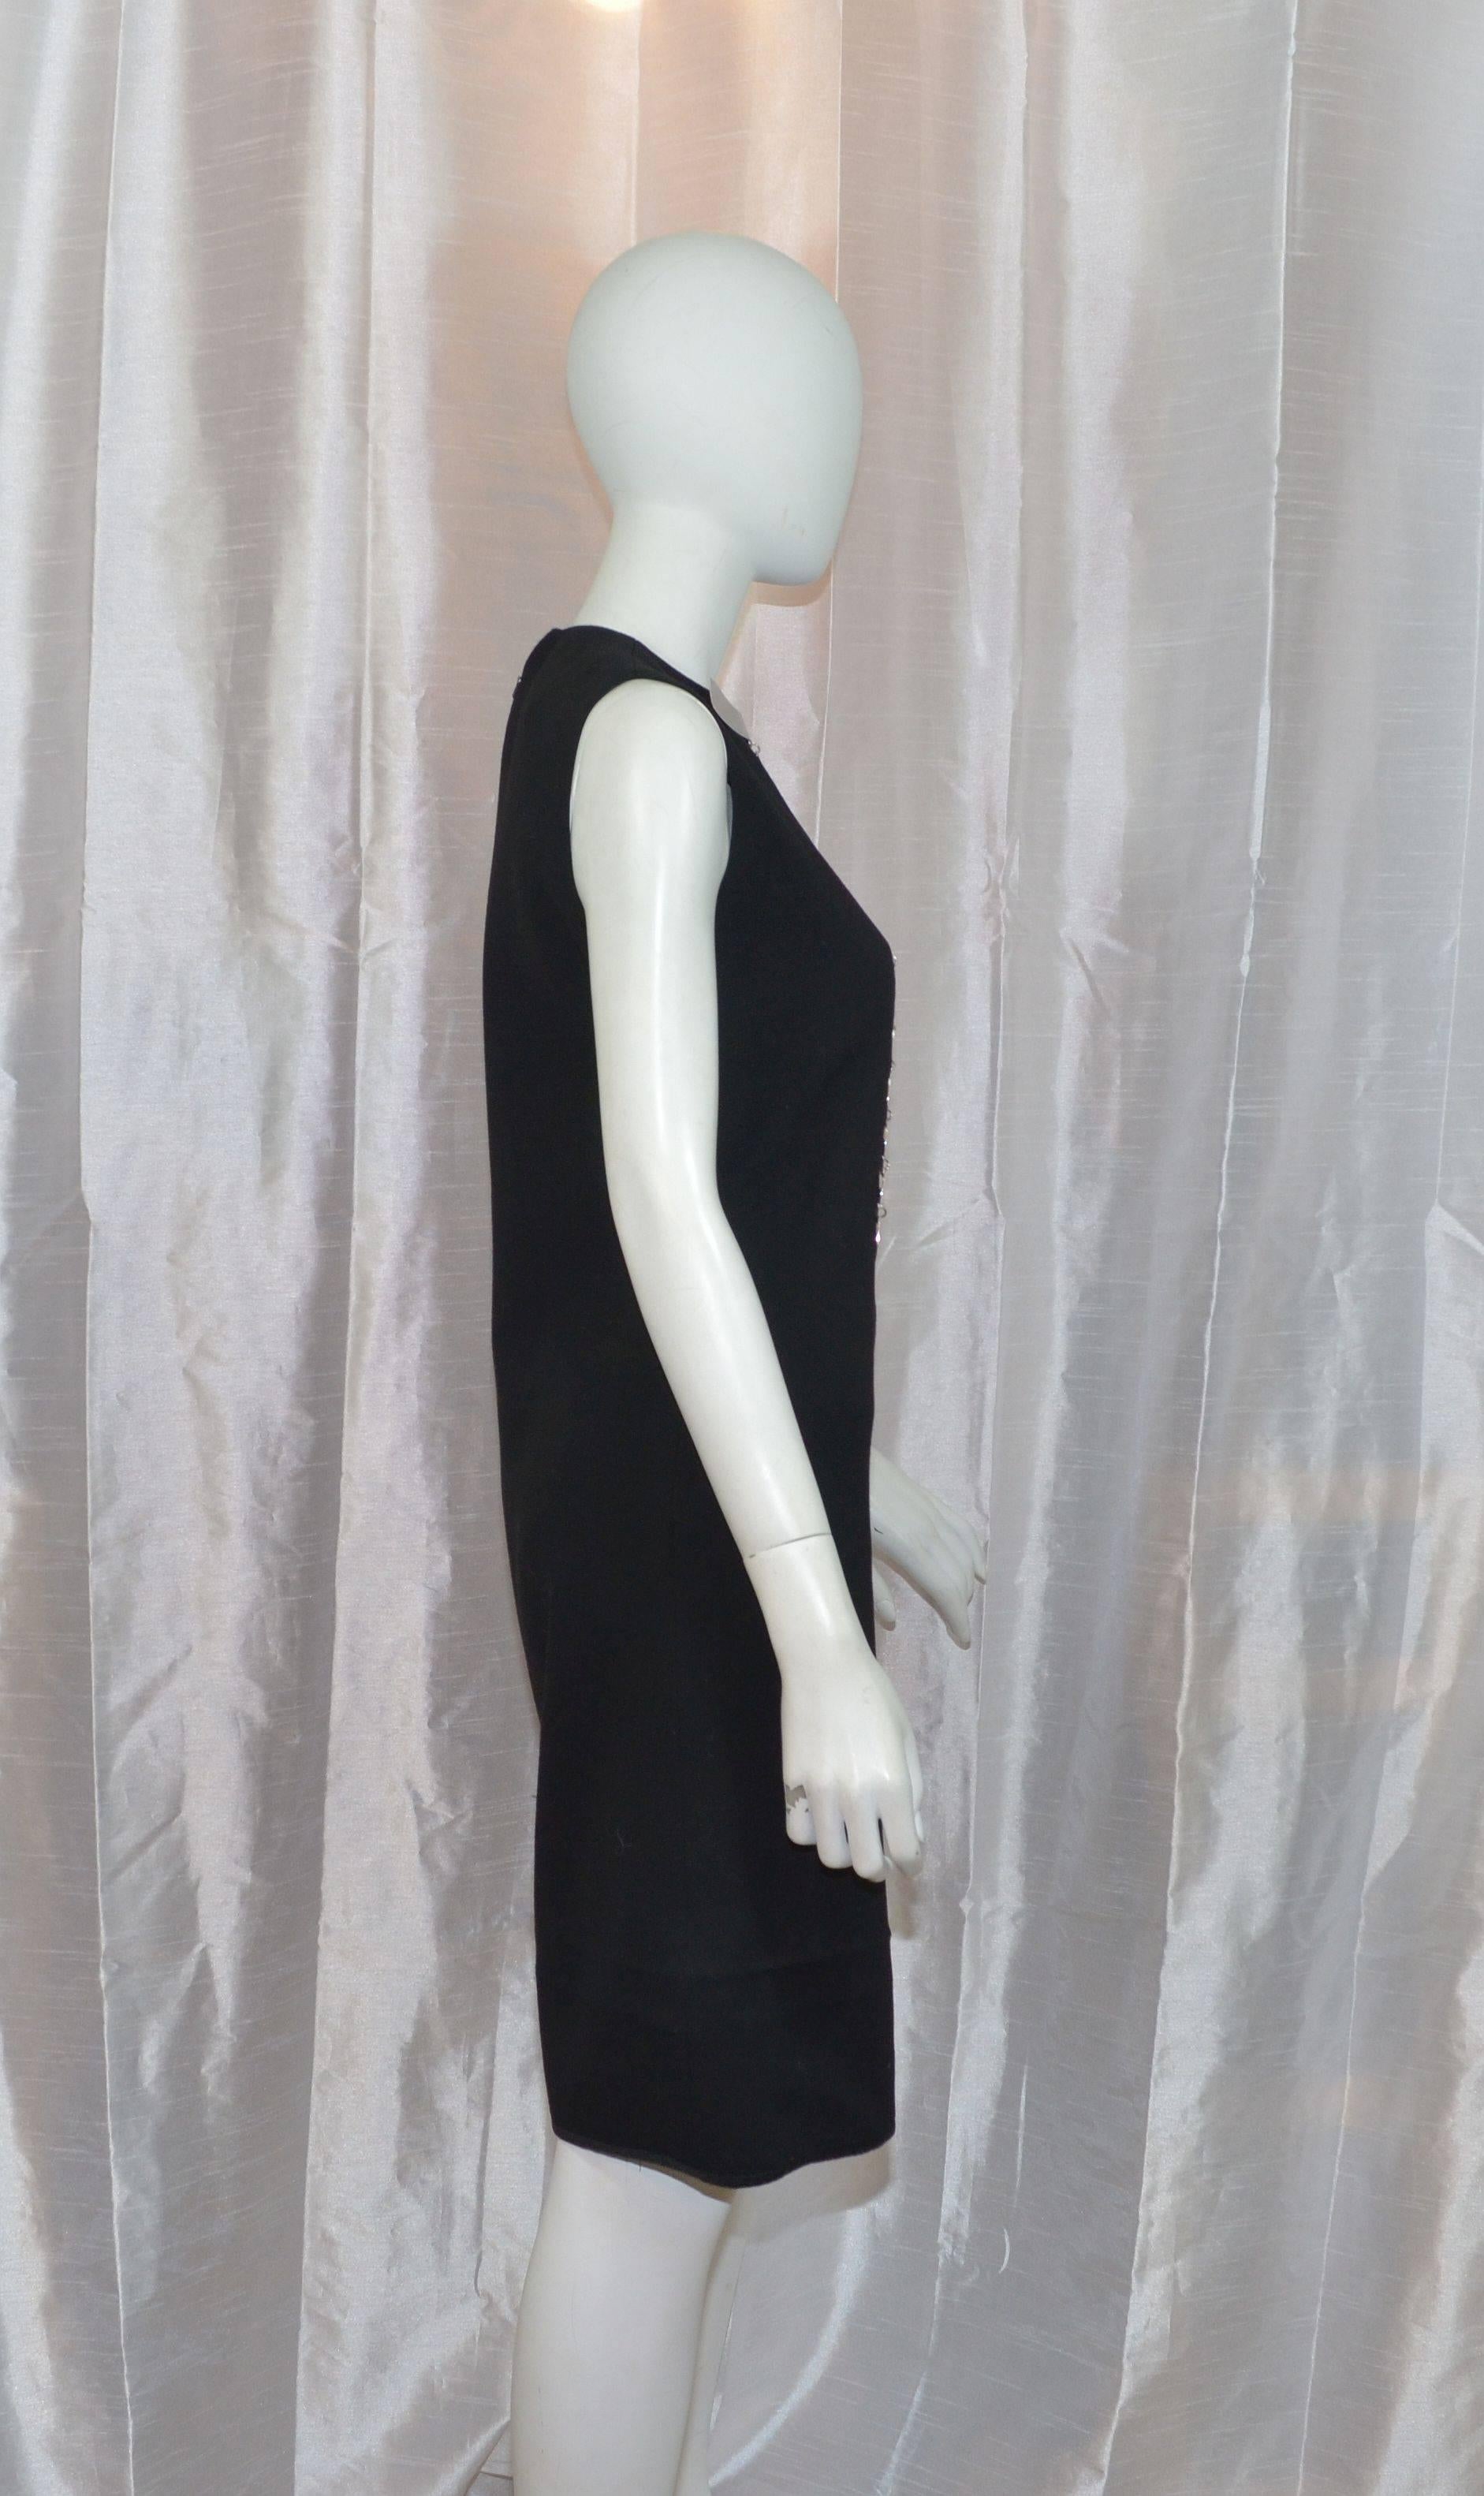 Iconic Pierre Cardin black wool A-line dress with a massive silver metal plate collar. Dress has a back zipper fastening and a is fully lined. Measurements: bust - 36'', waist - 34'', hips - 38'', length - 40'' In excellent vintage condition. This